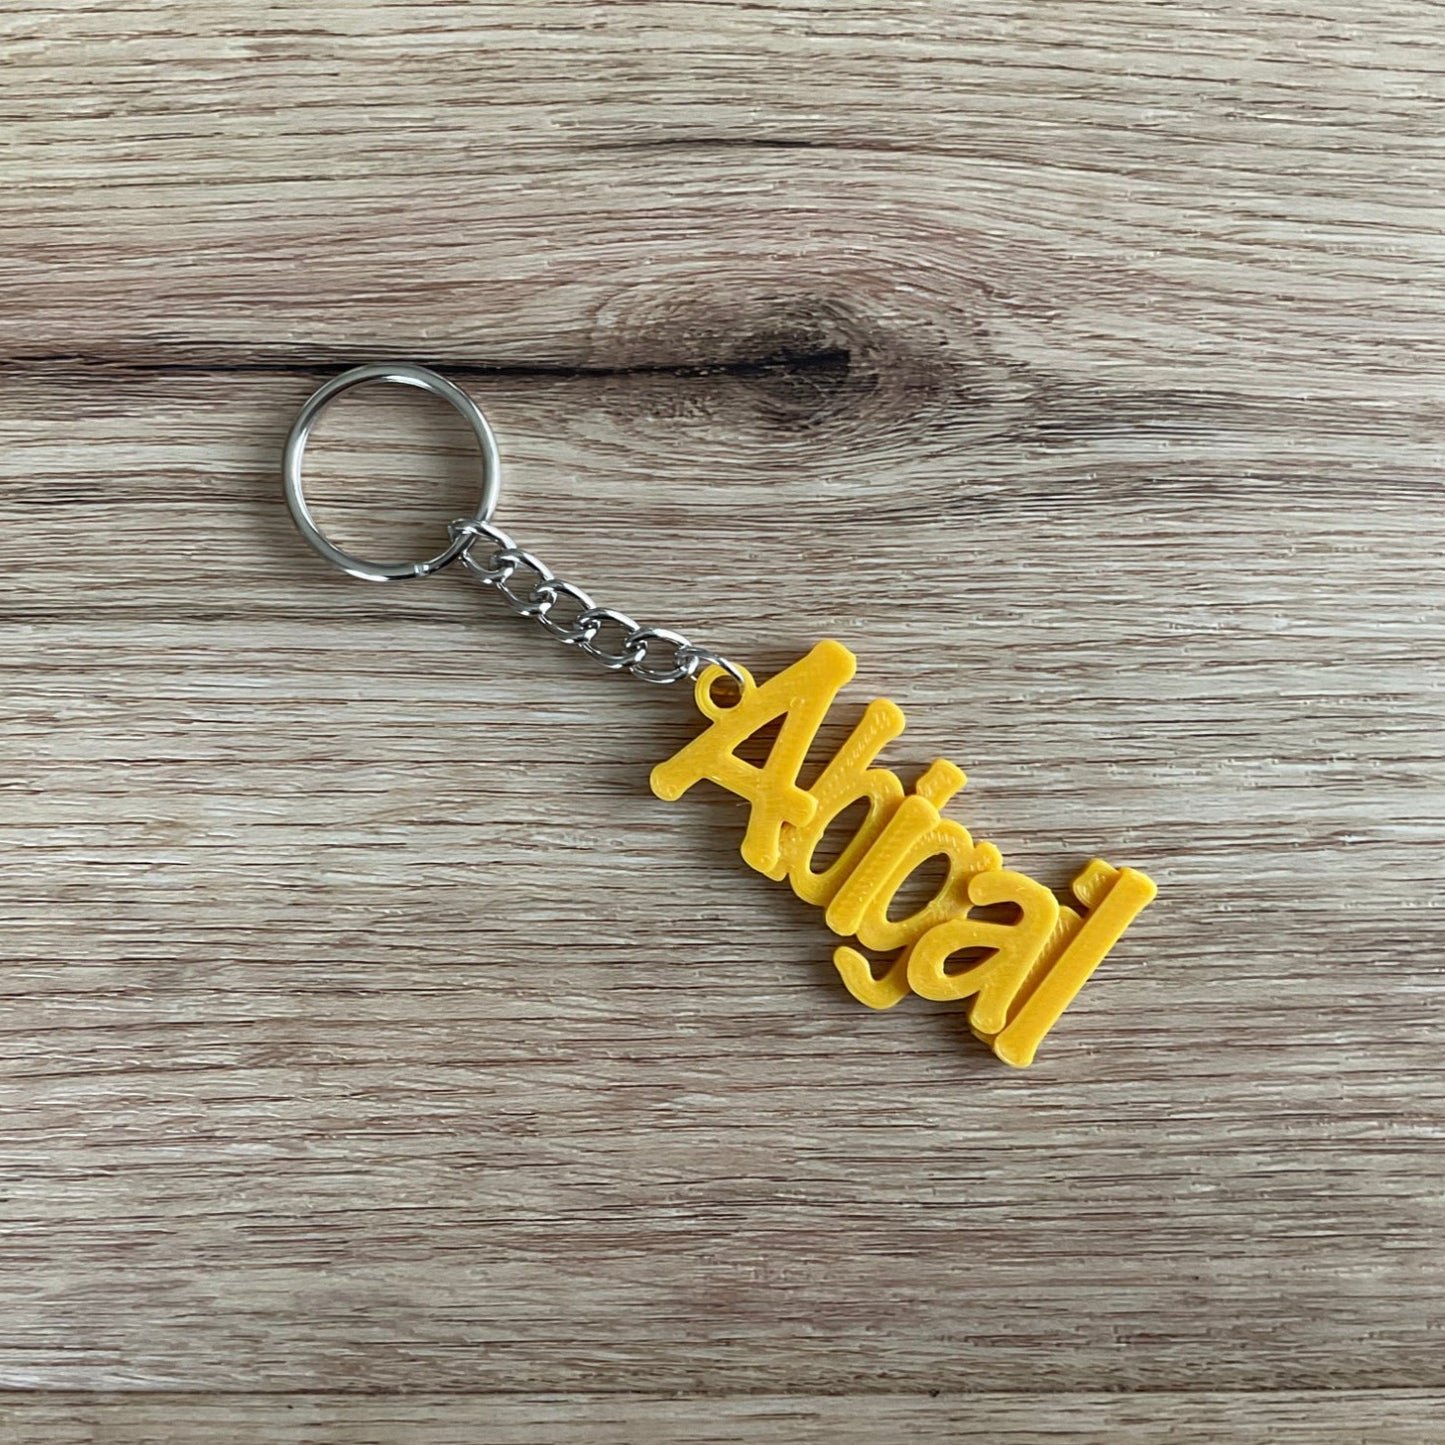 An sample image of the gold keychain